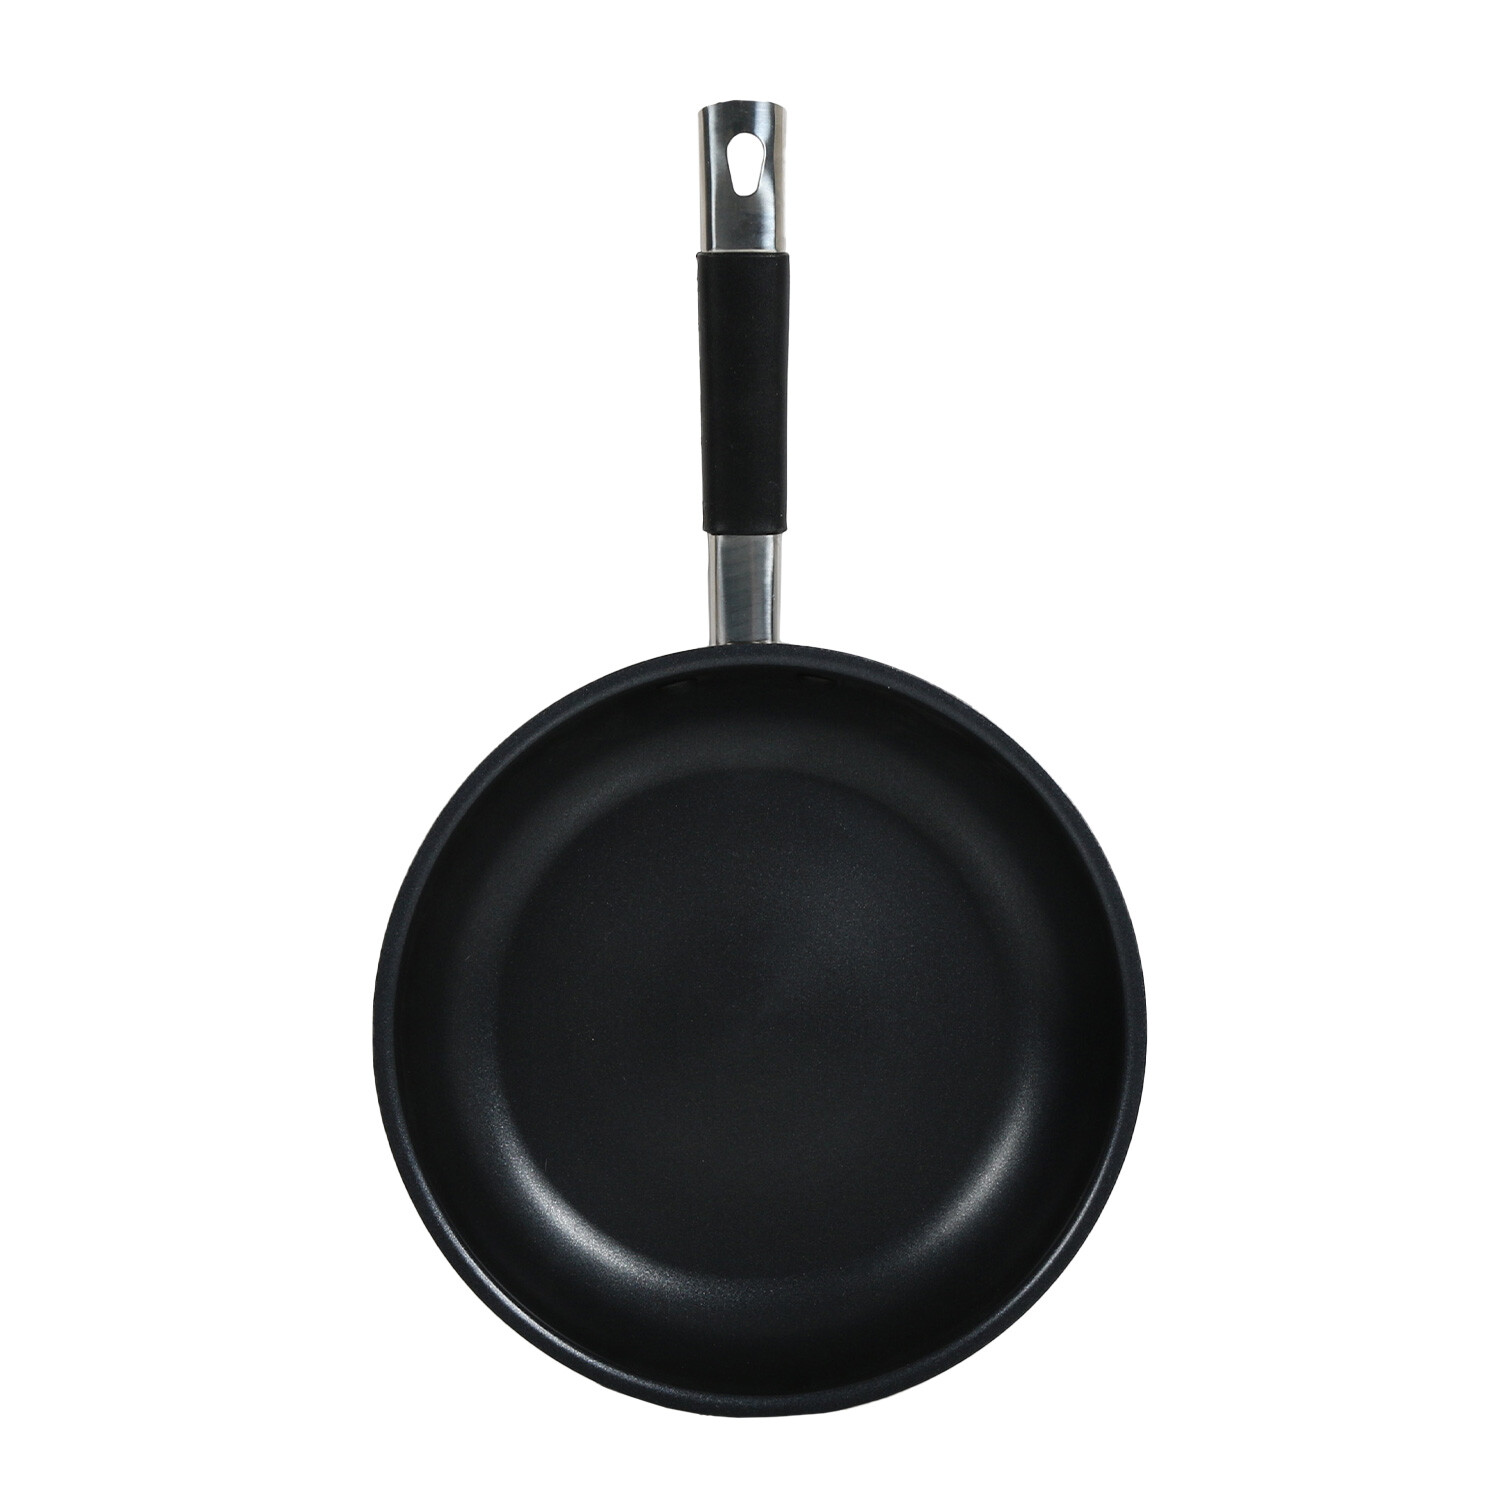 MY Stainless Steel Non-Stick Fry Pan 24cm Image